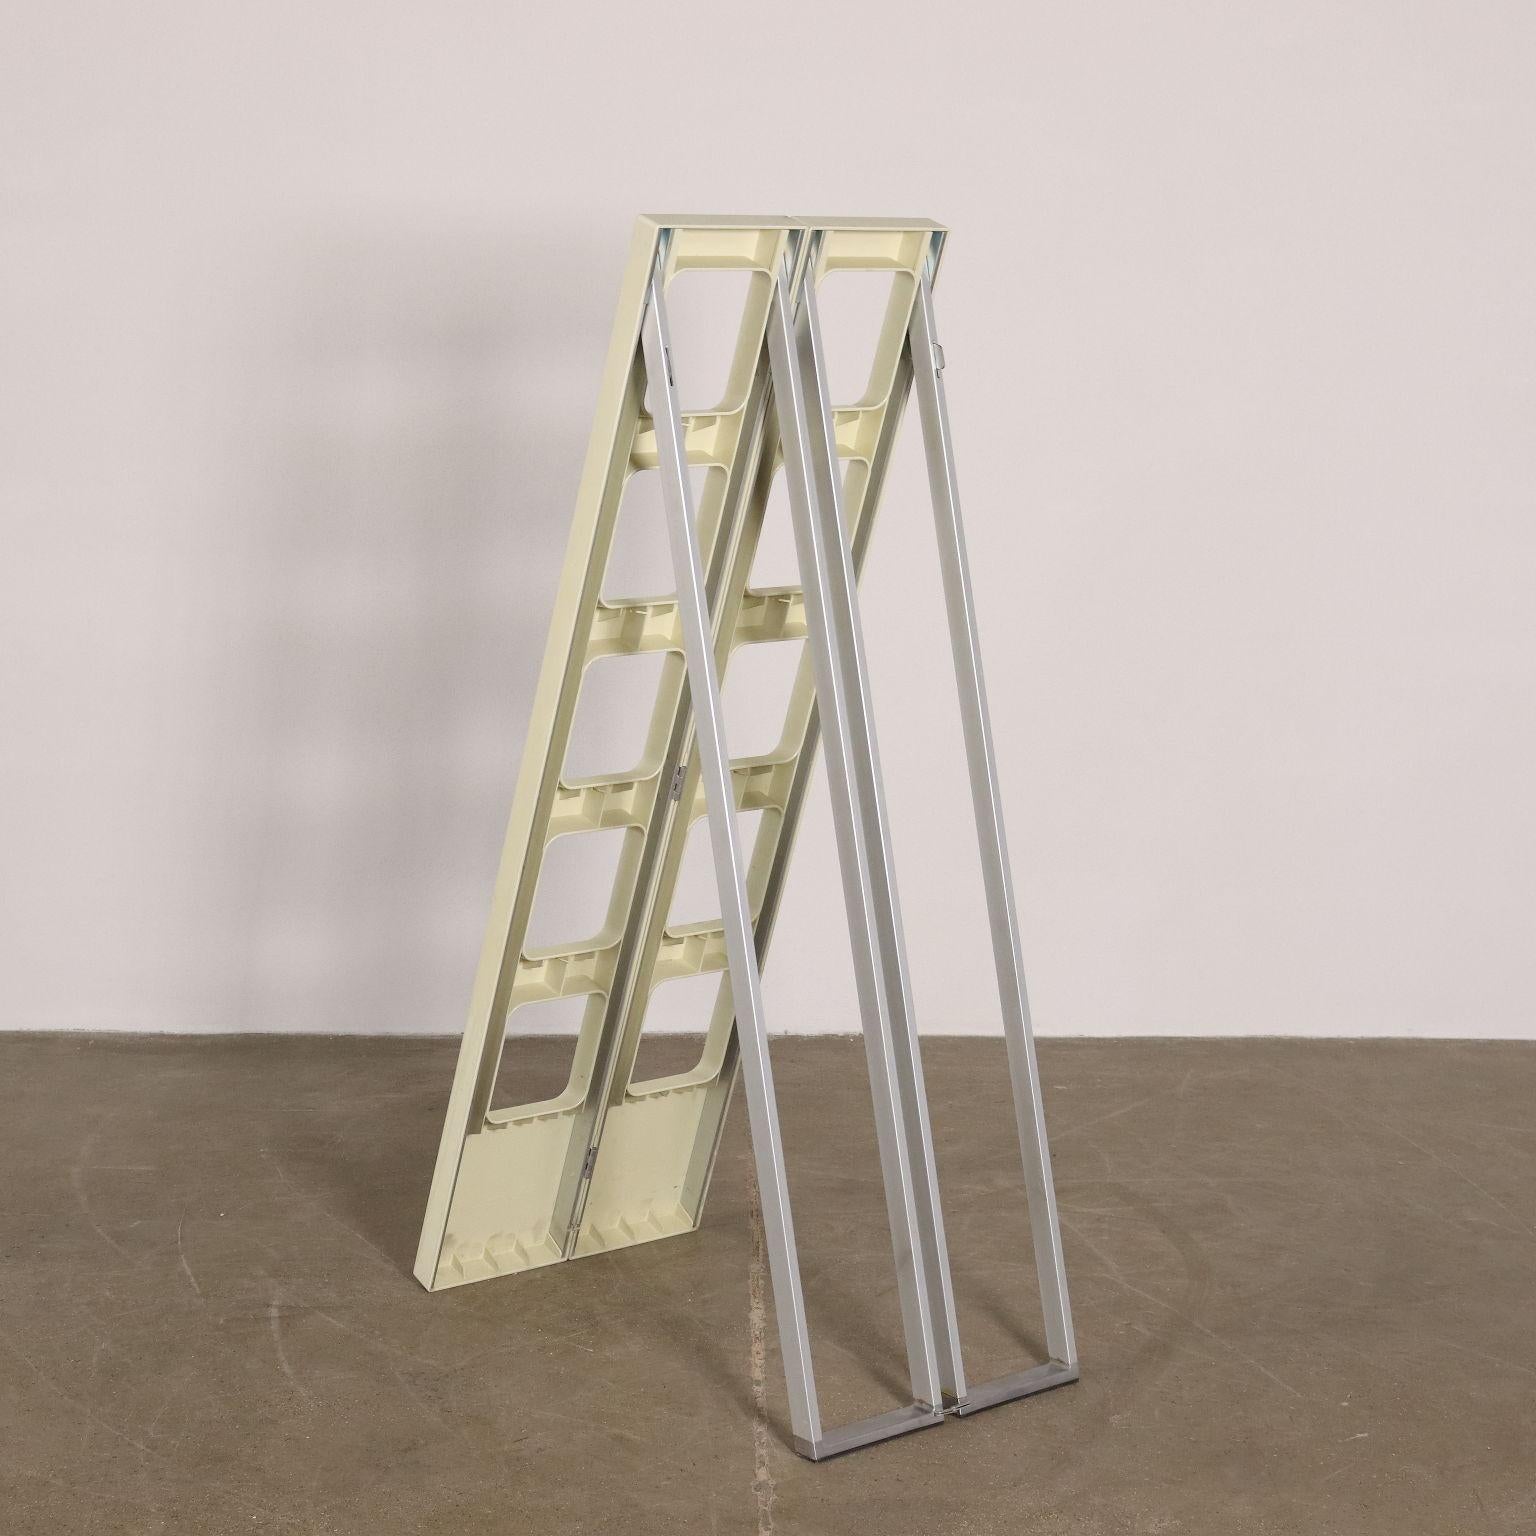 Metal Ladder 'Scaleo' by L&O 'Lucci and ORlandini' for Velca, 1970s